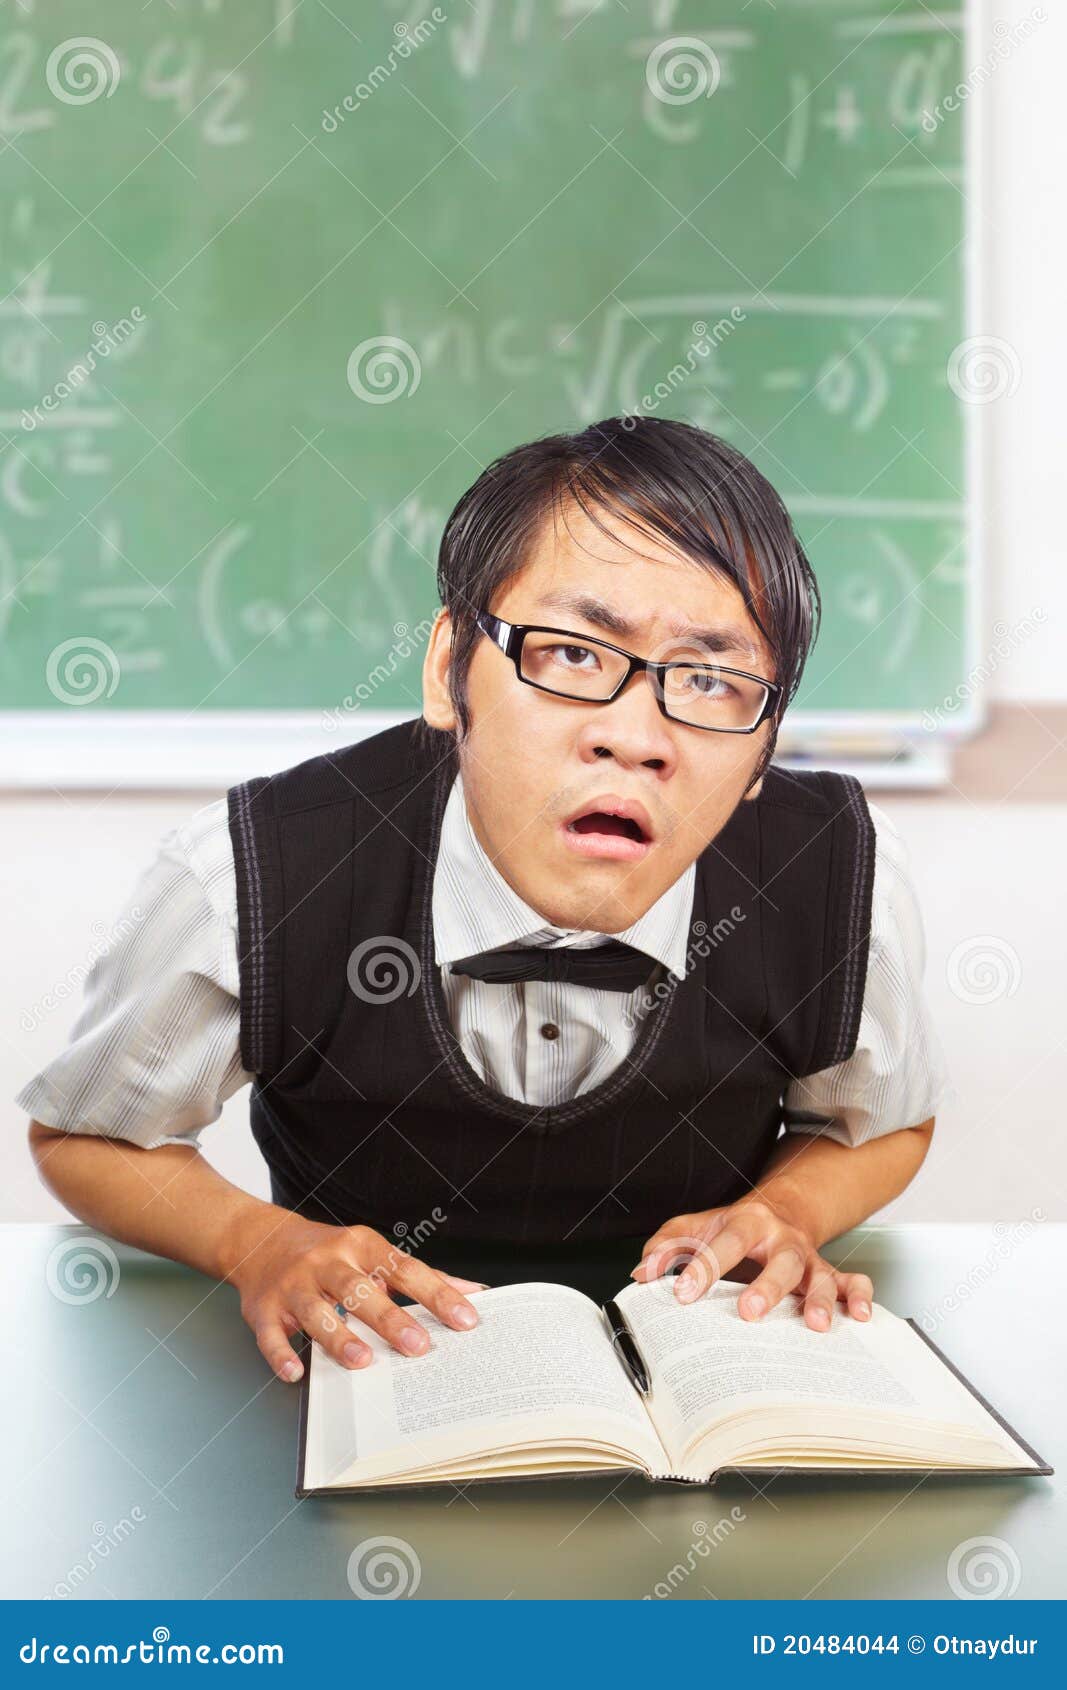 Nerd Male Student Stock Images - Image: 20484044